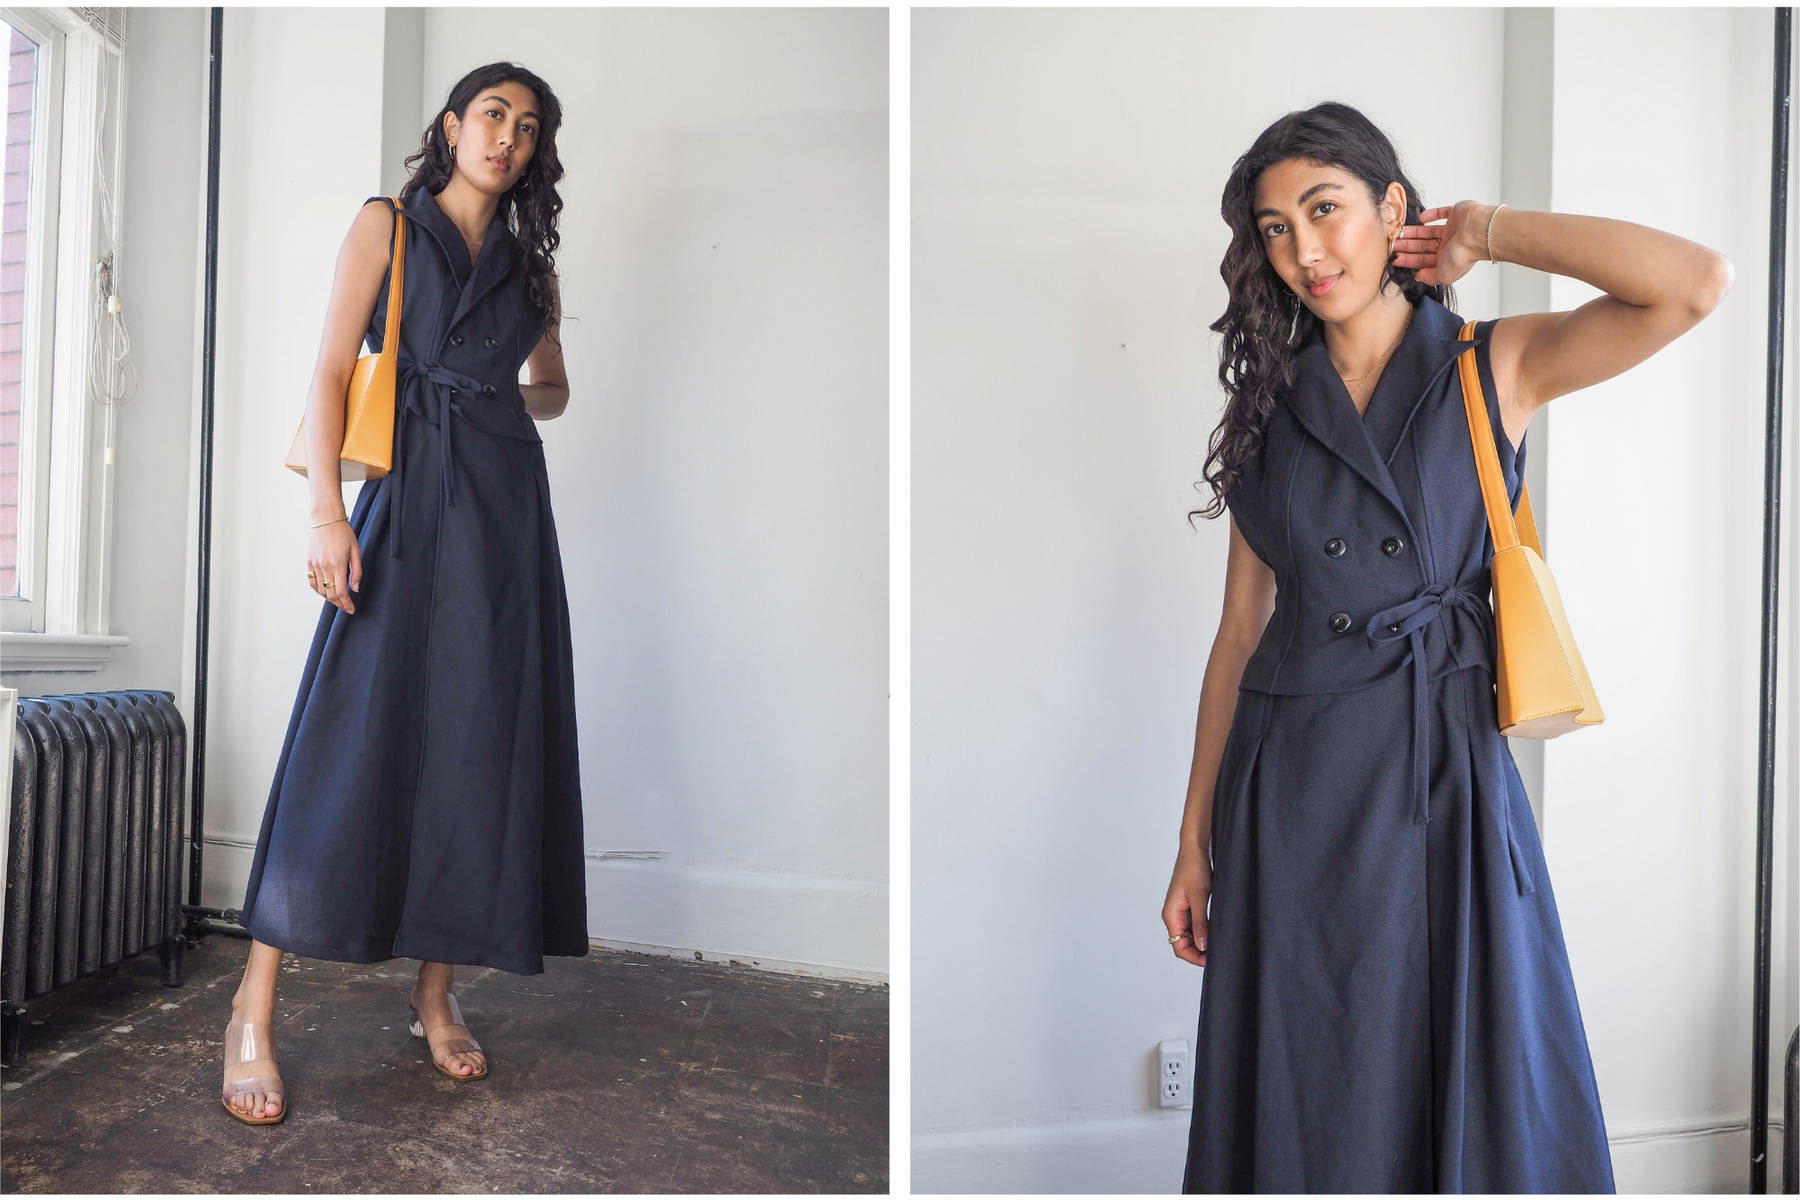 STYLE MUSE | Leah Grewal, Model, Marketer and Content Creator